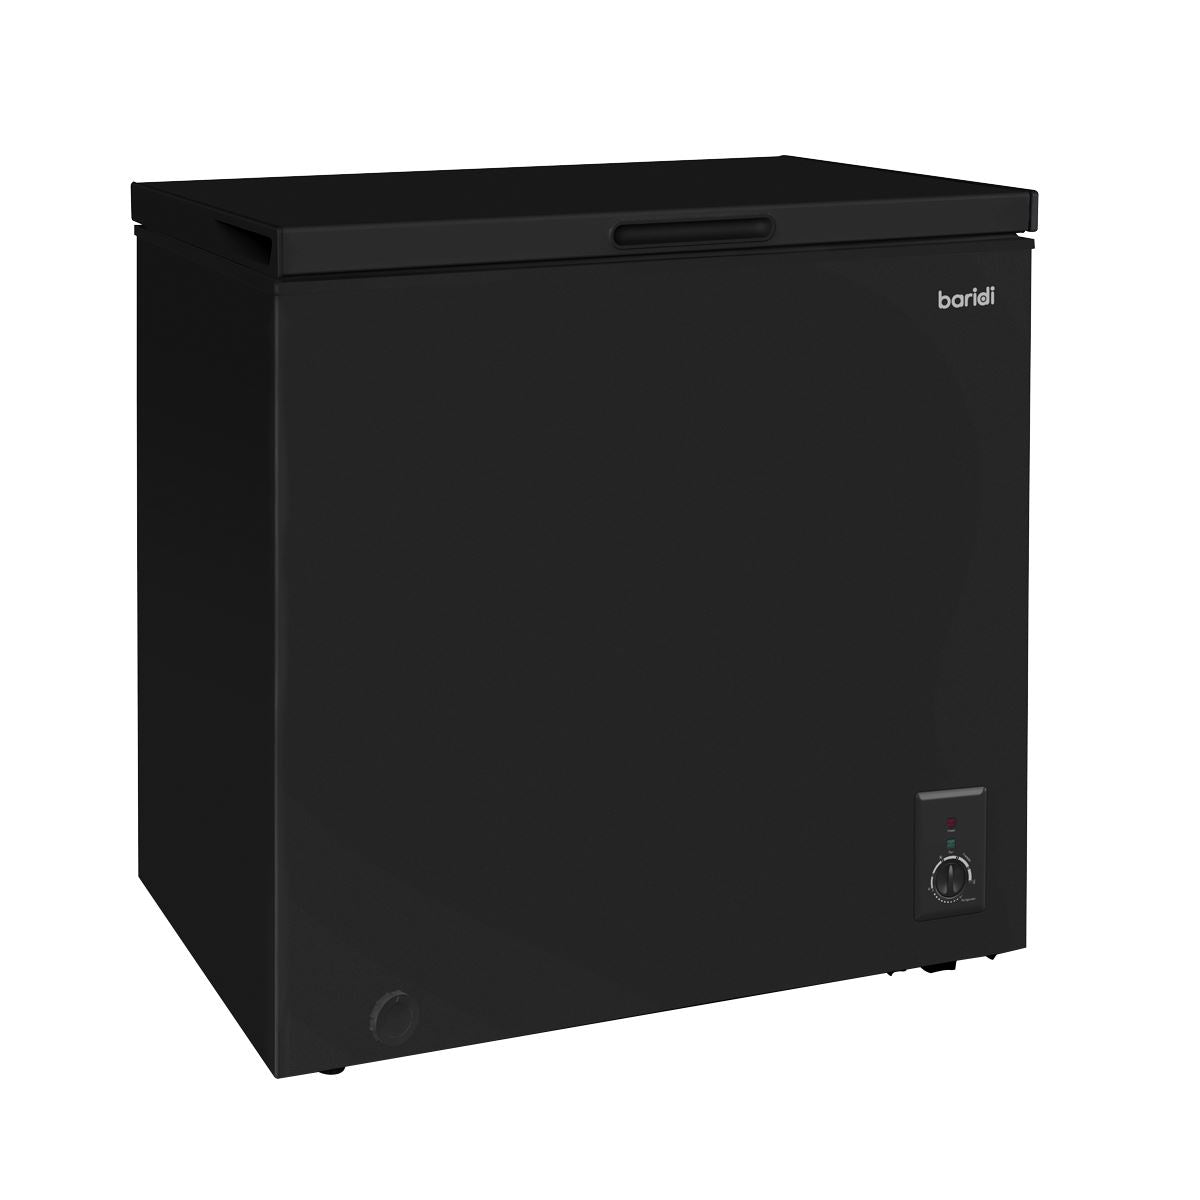 Baridi Freestanding Chest Freezer, 142L Capacity, Garages and Outbuilding Safe, -12 to -24°C Adjustable Thermostat with Refrigeration Mode, Black